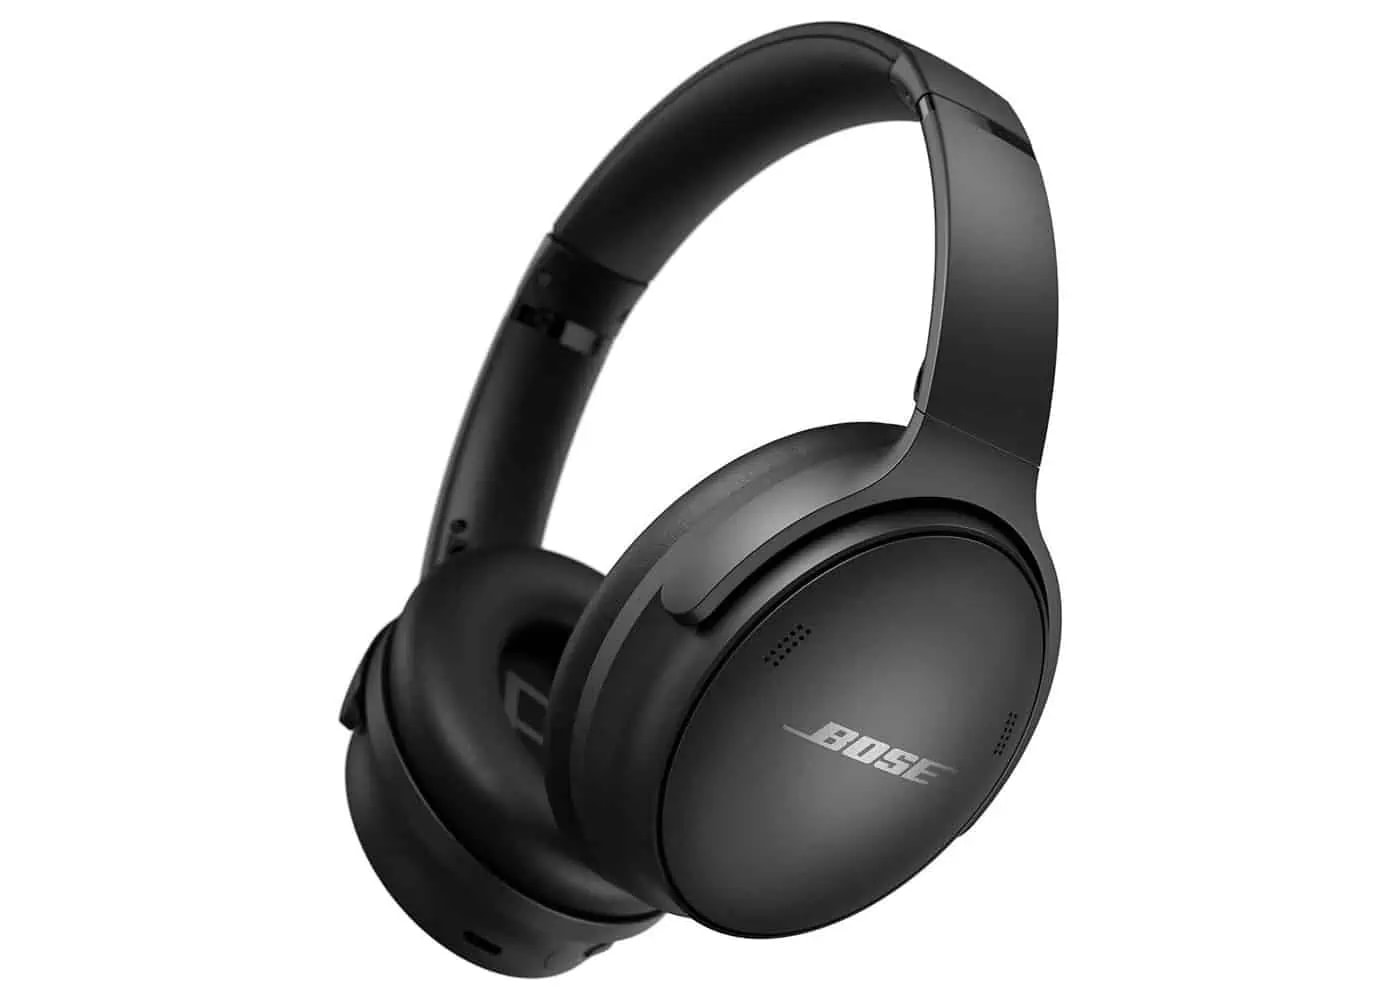 A firmware update adds an equalizer so you can tweak the sound of your Bose QuietComfort 45 headphones.